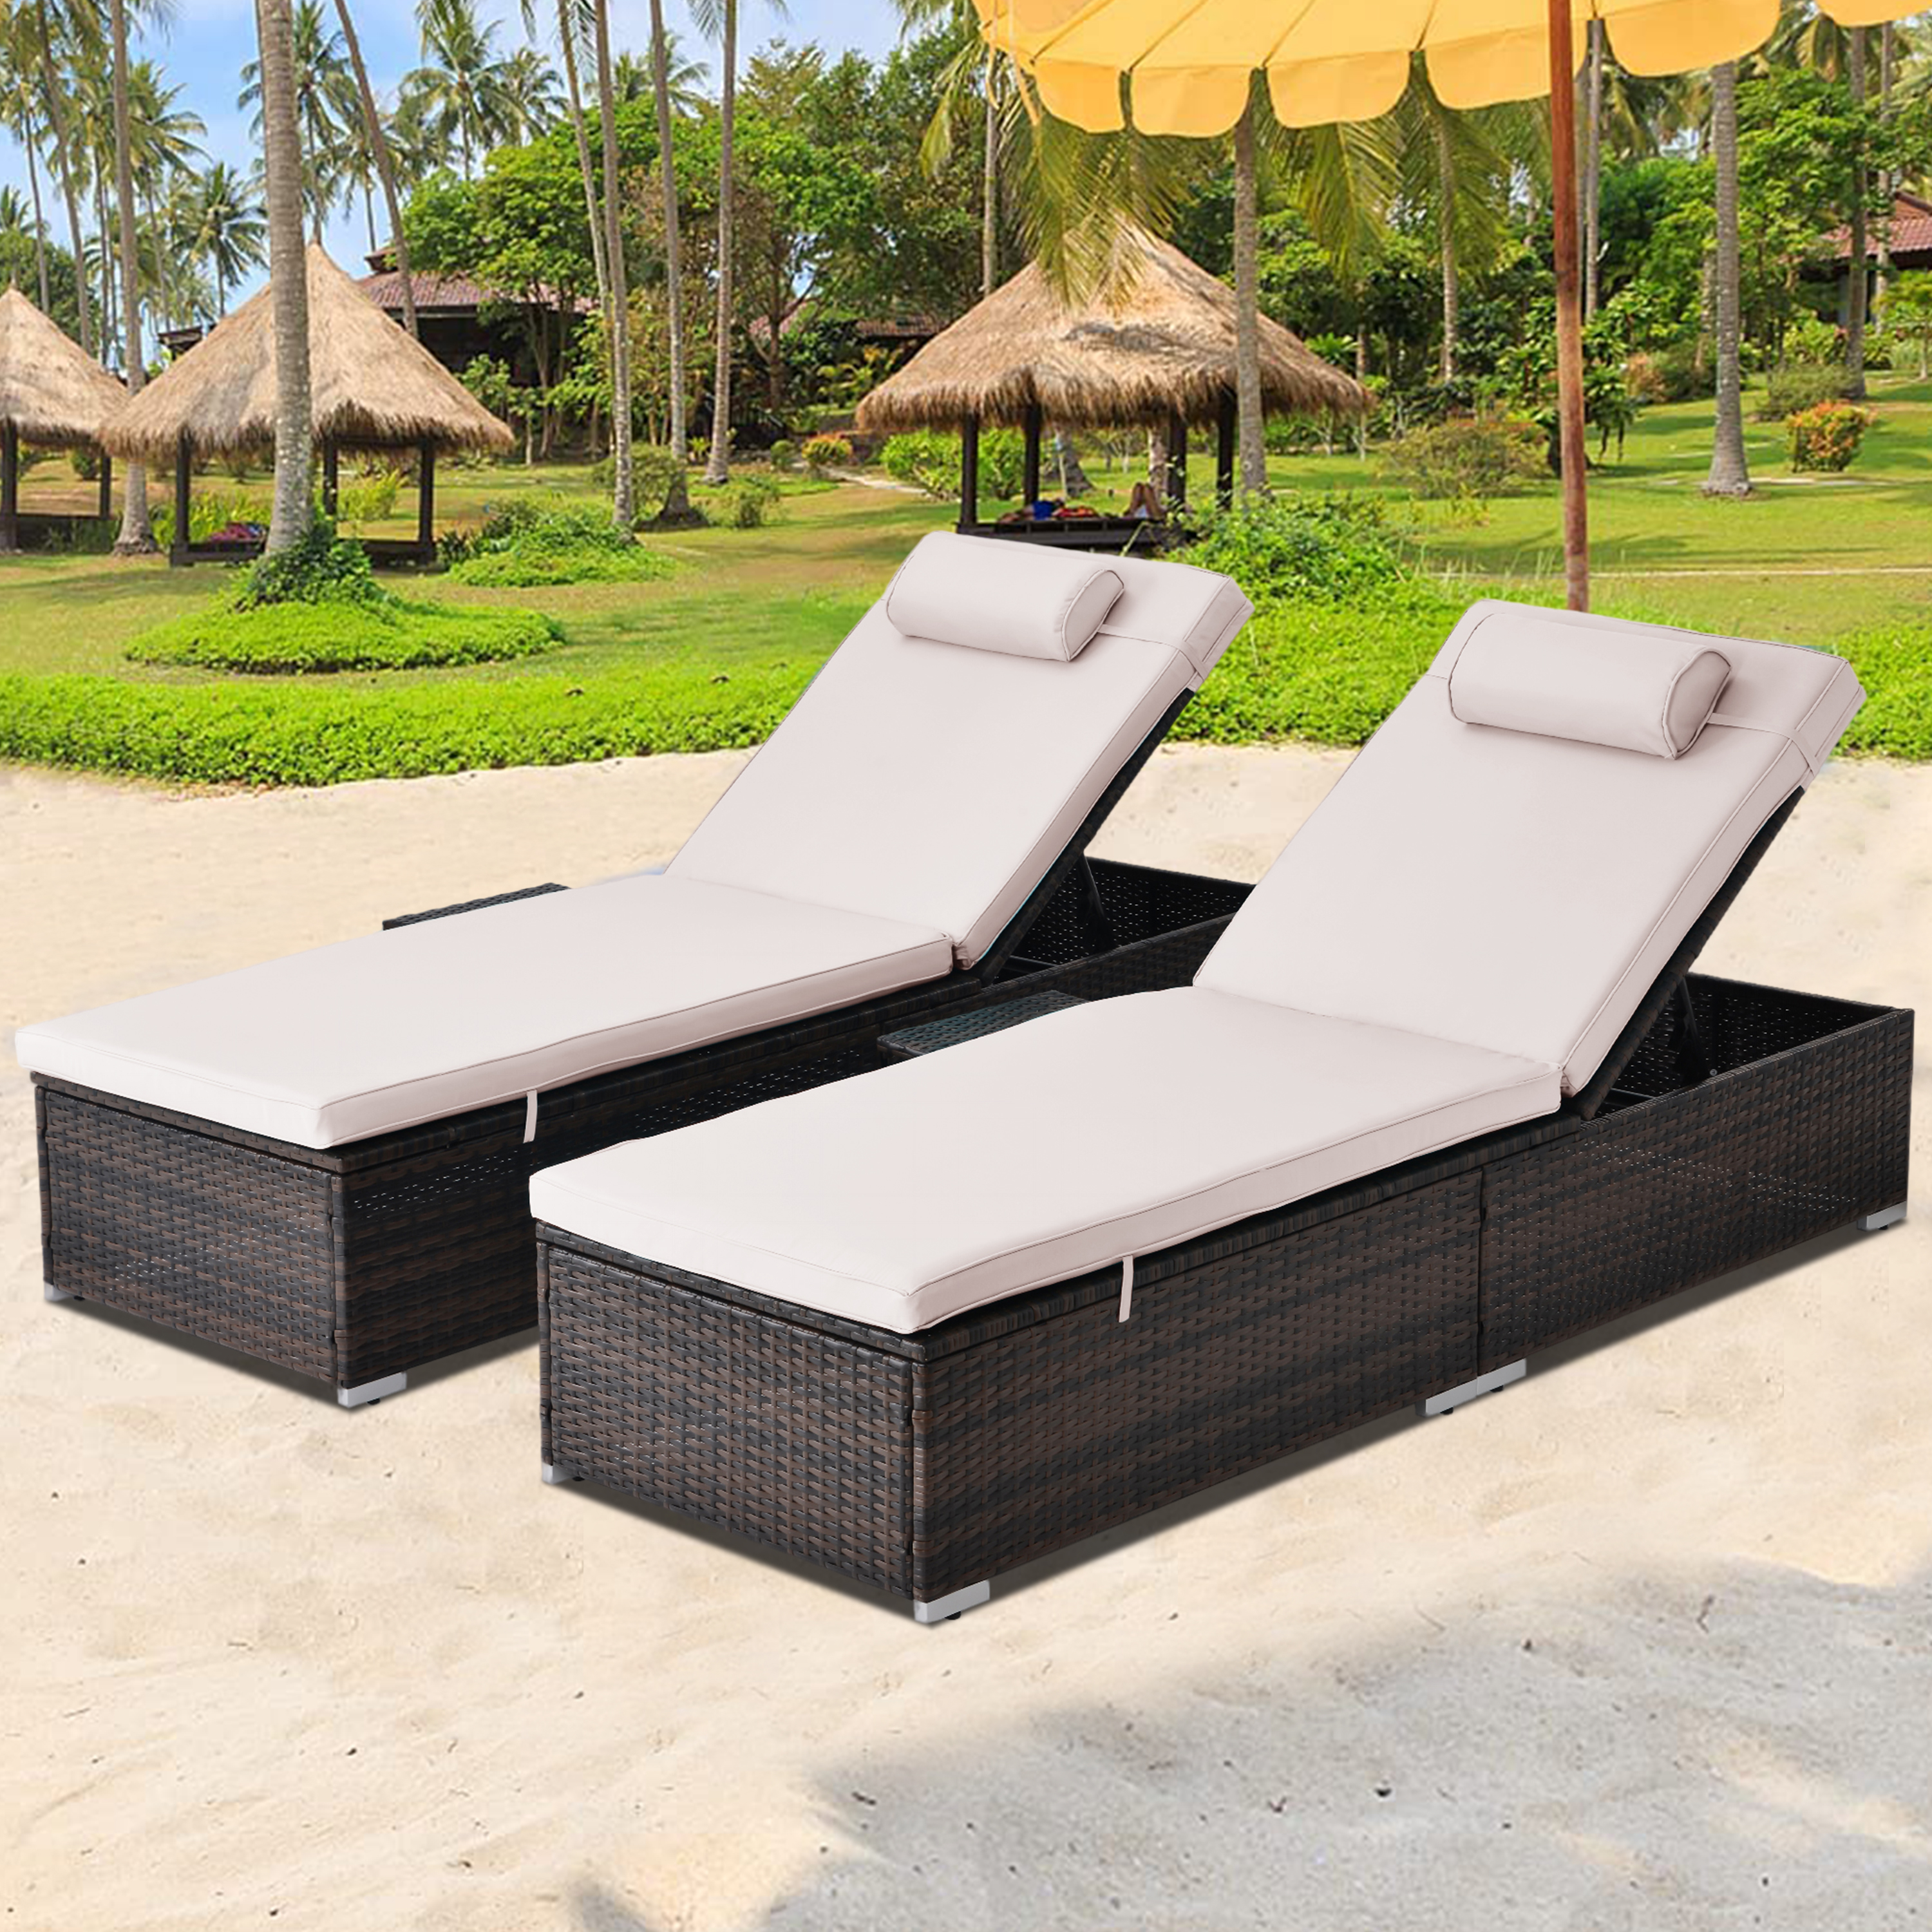 Outdoor Patio Lounge Furniture Set of 2, All-Weather Wicker Adjustable Backrest Recliners with Side Table, Pool Chaise Chairs Sets with Comfort Head Pillow, Glass Top Coffee Table, SS2349 - image 1 of 8